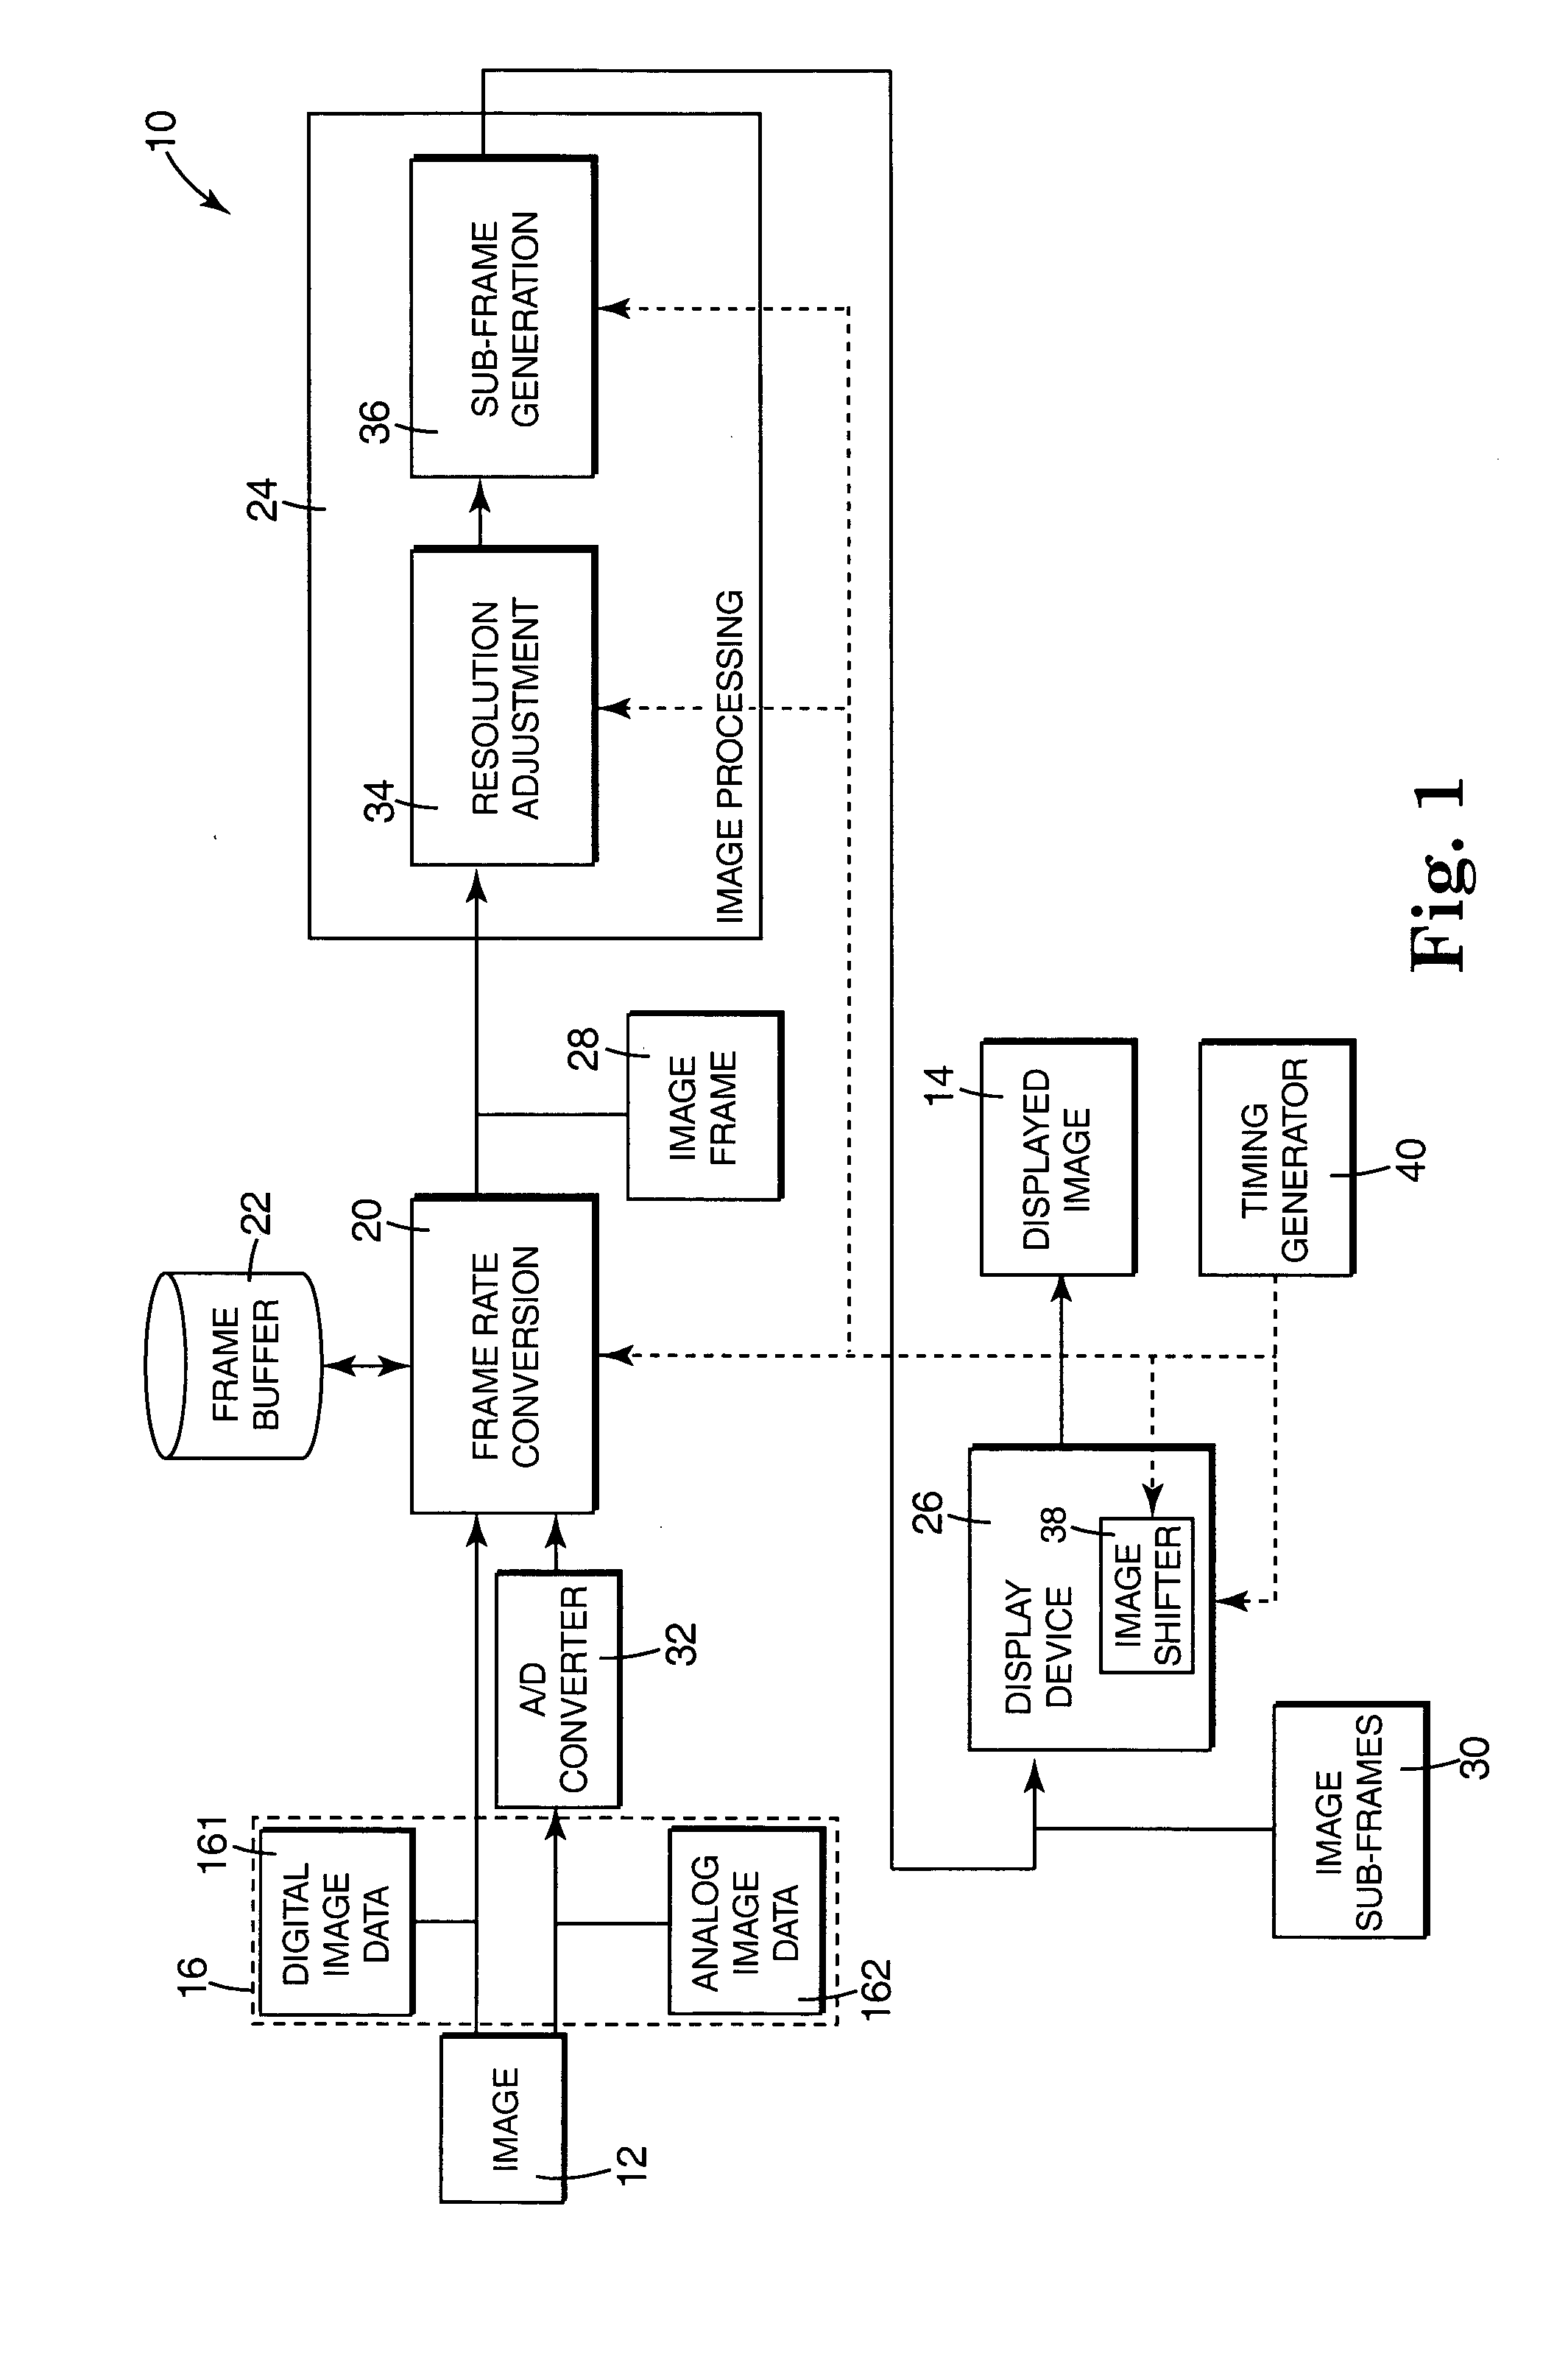 Generating and displaying spatially offset sub-frames